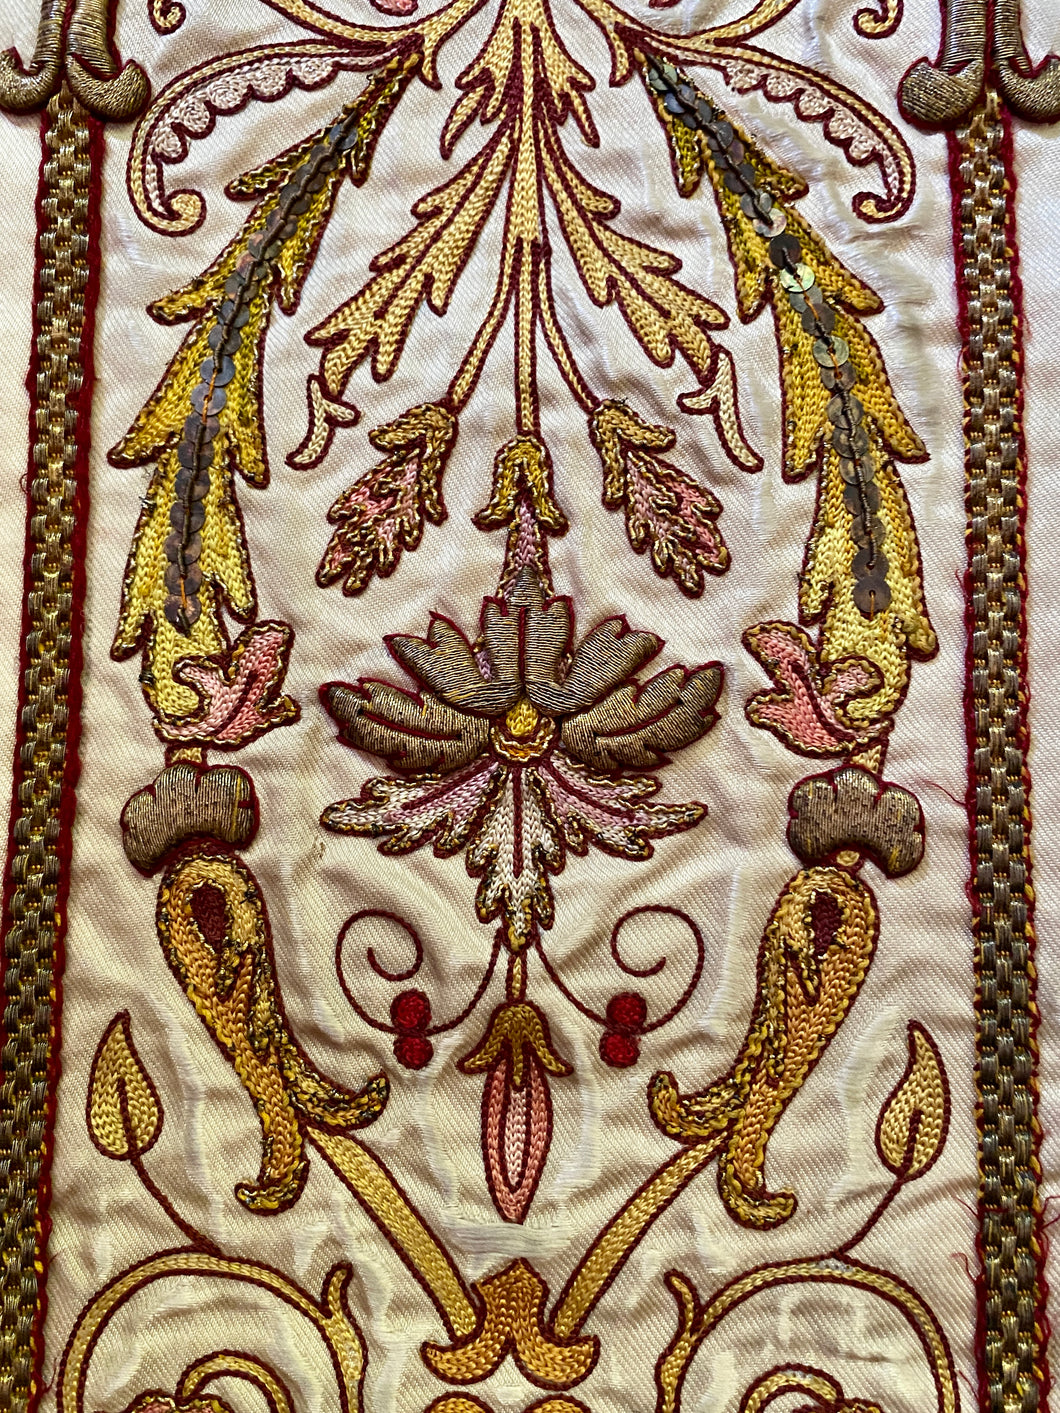 Antique Hand Embroidered Liturgical Embroidered Panel